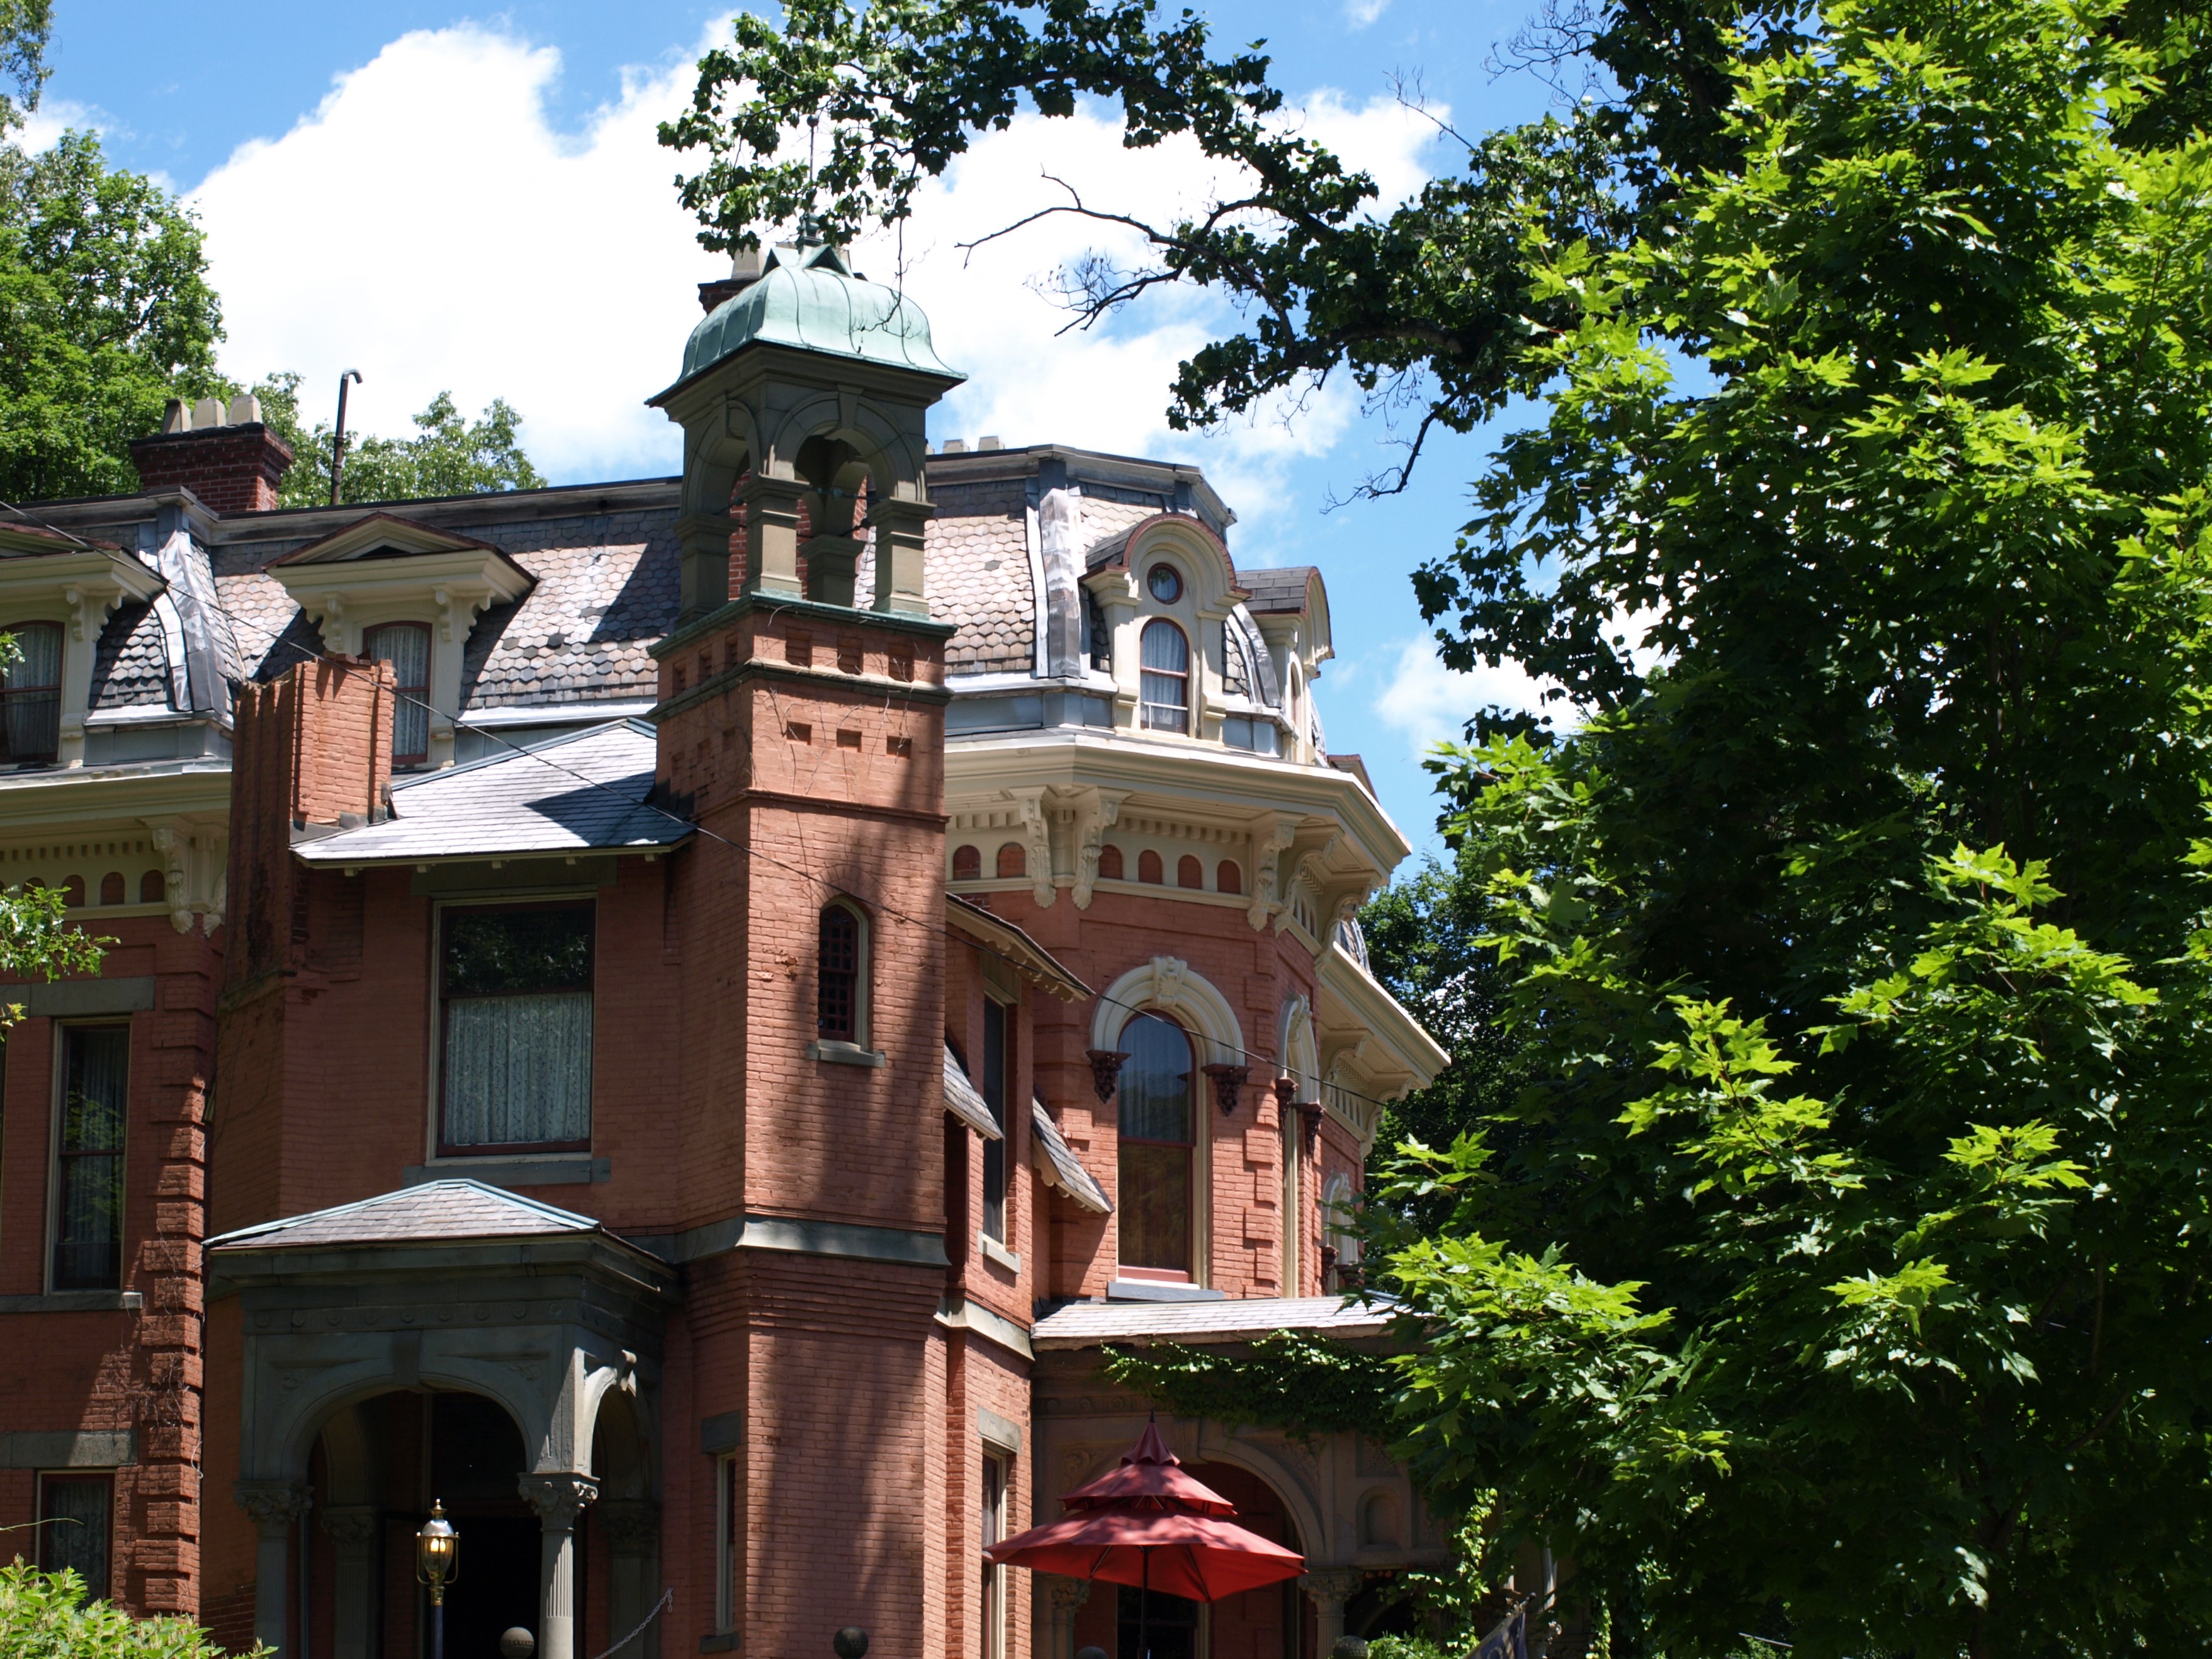 Harry Packer Mansion in Jim Thorpe, PA, a Trail Town on the D&L.